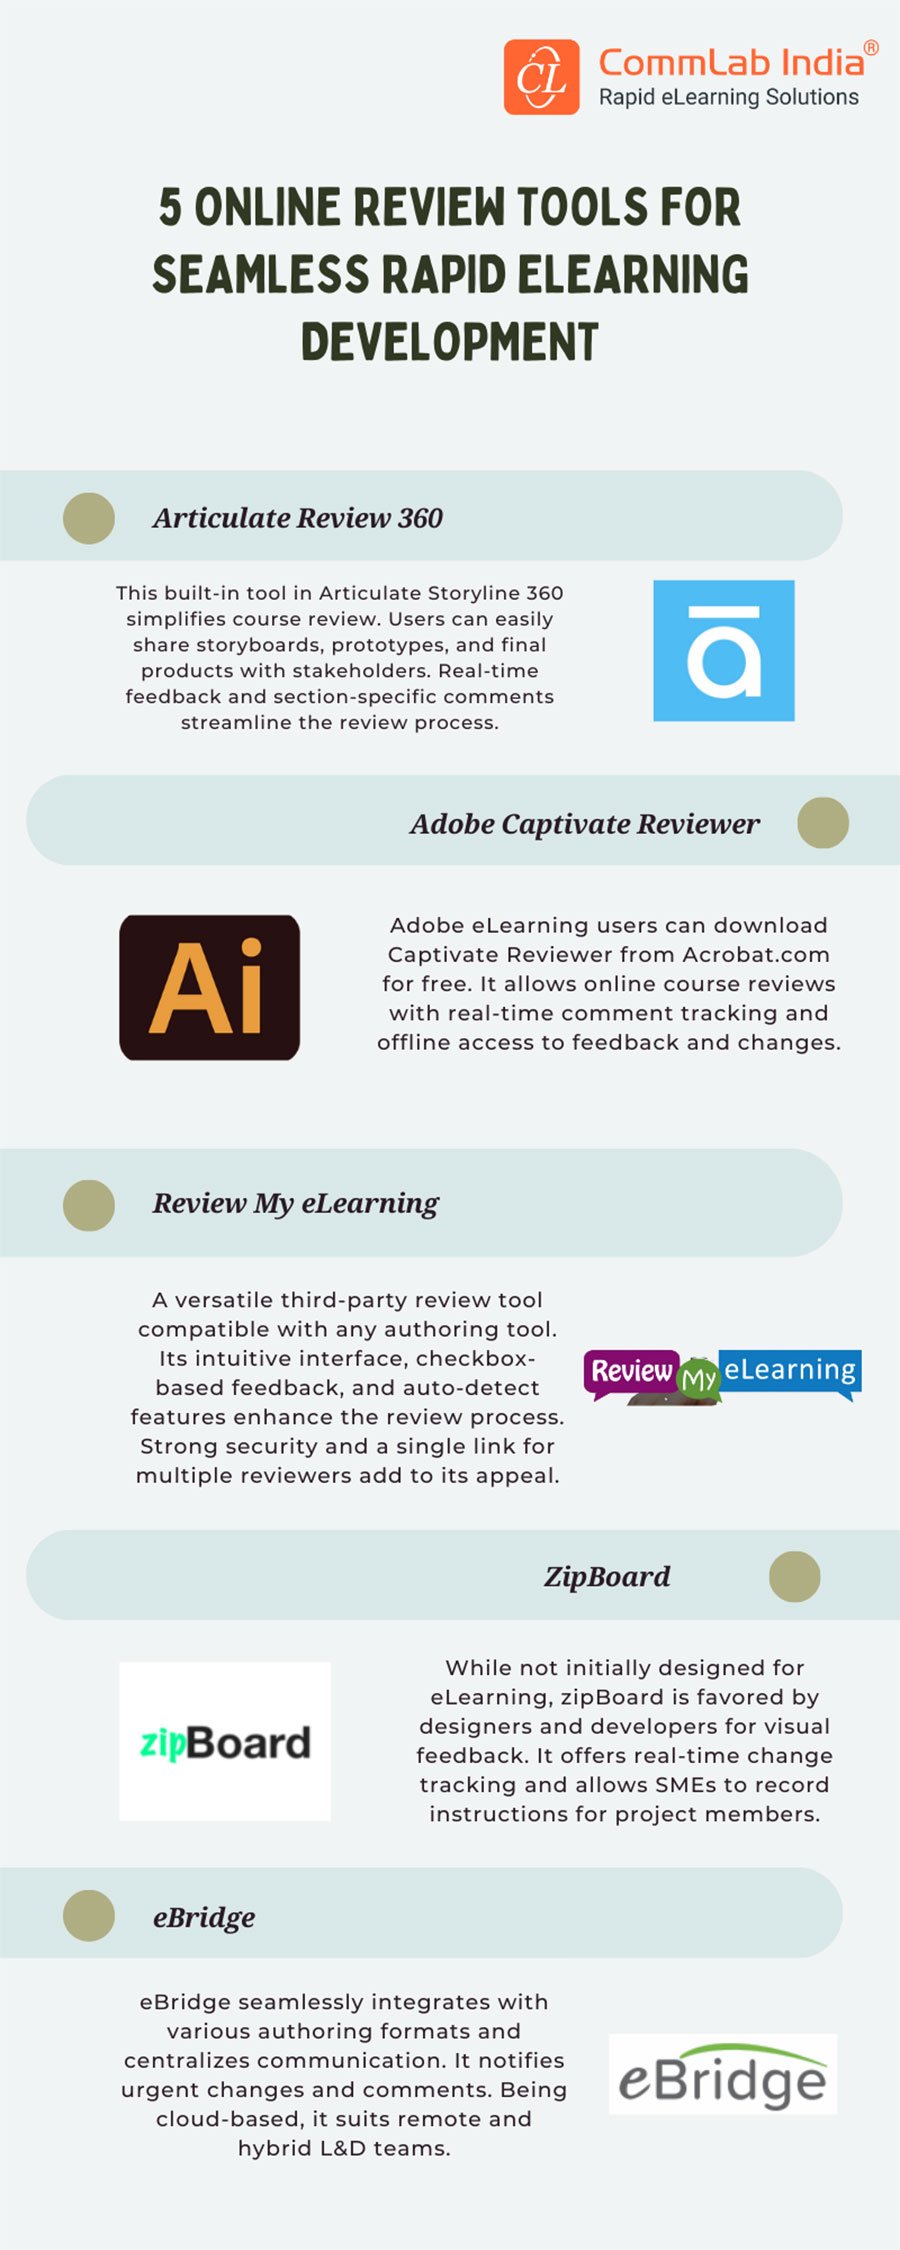 5 Online Review Tools for Seamless eLearning Development